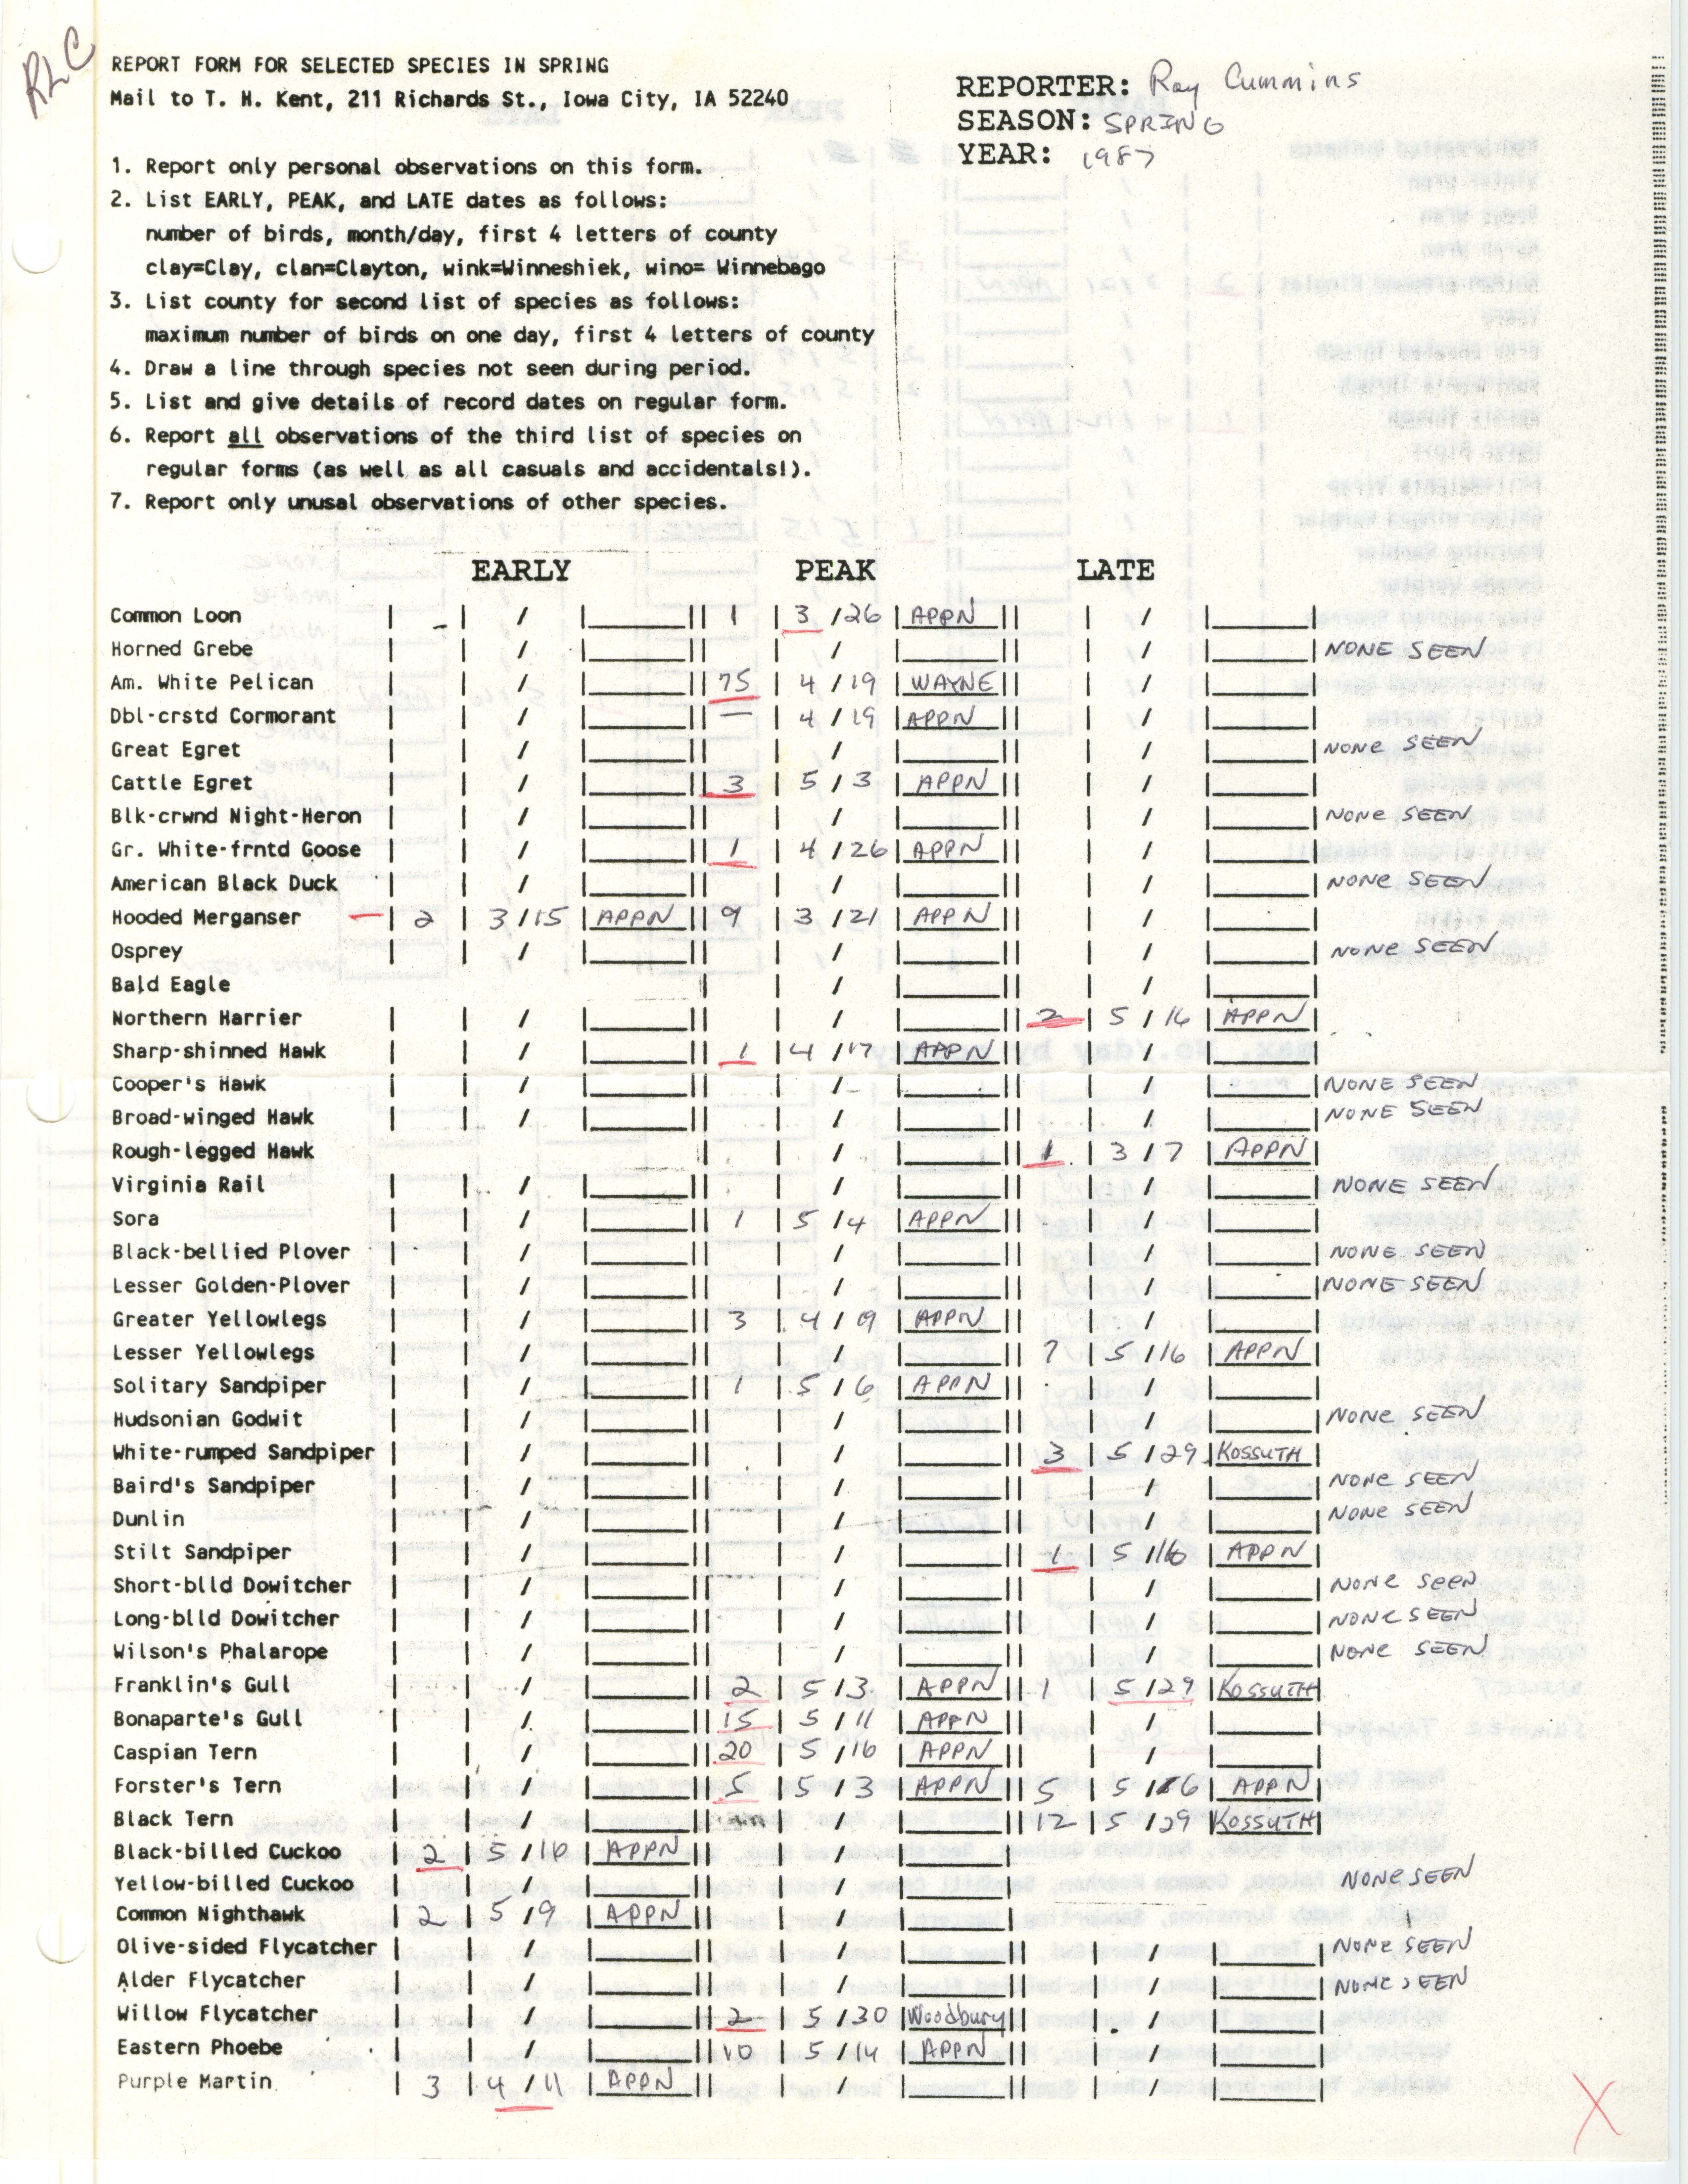 Report for selected species in spring, contributed by Raymond L. Cummins, spring 1987